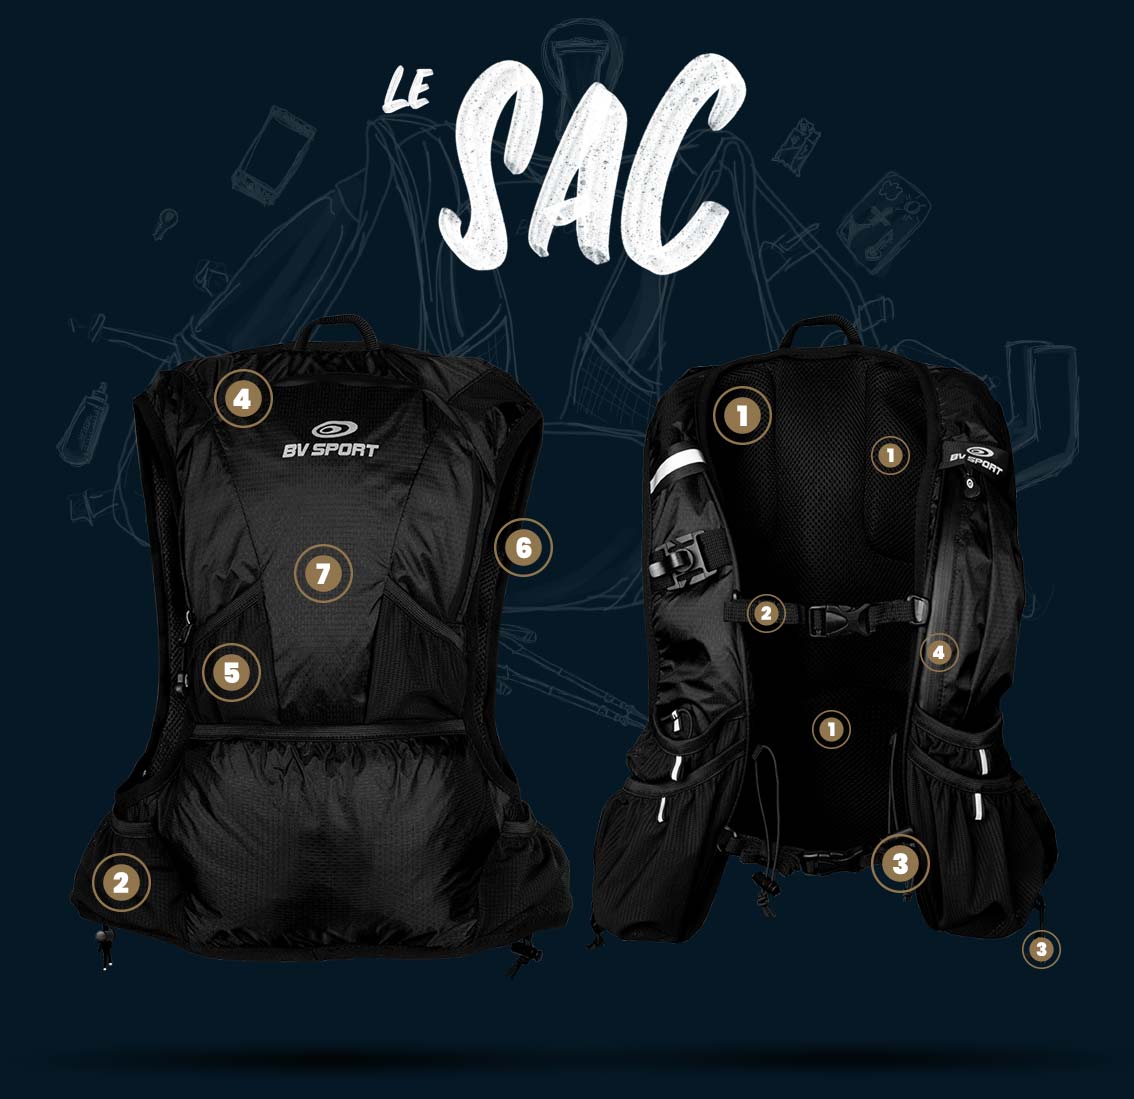 Running-trail hydration backpack "Le sac" black